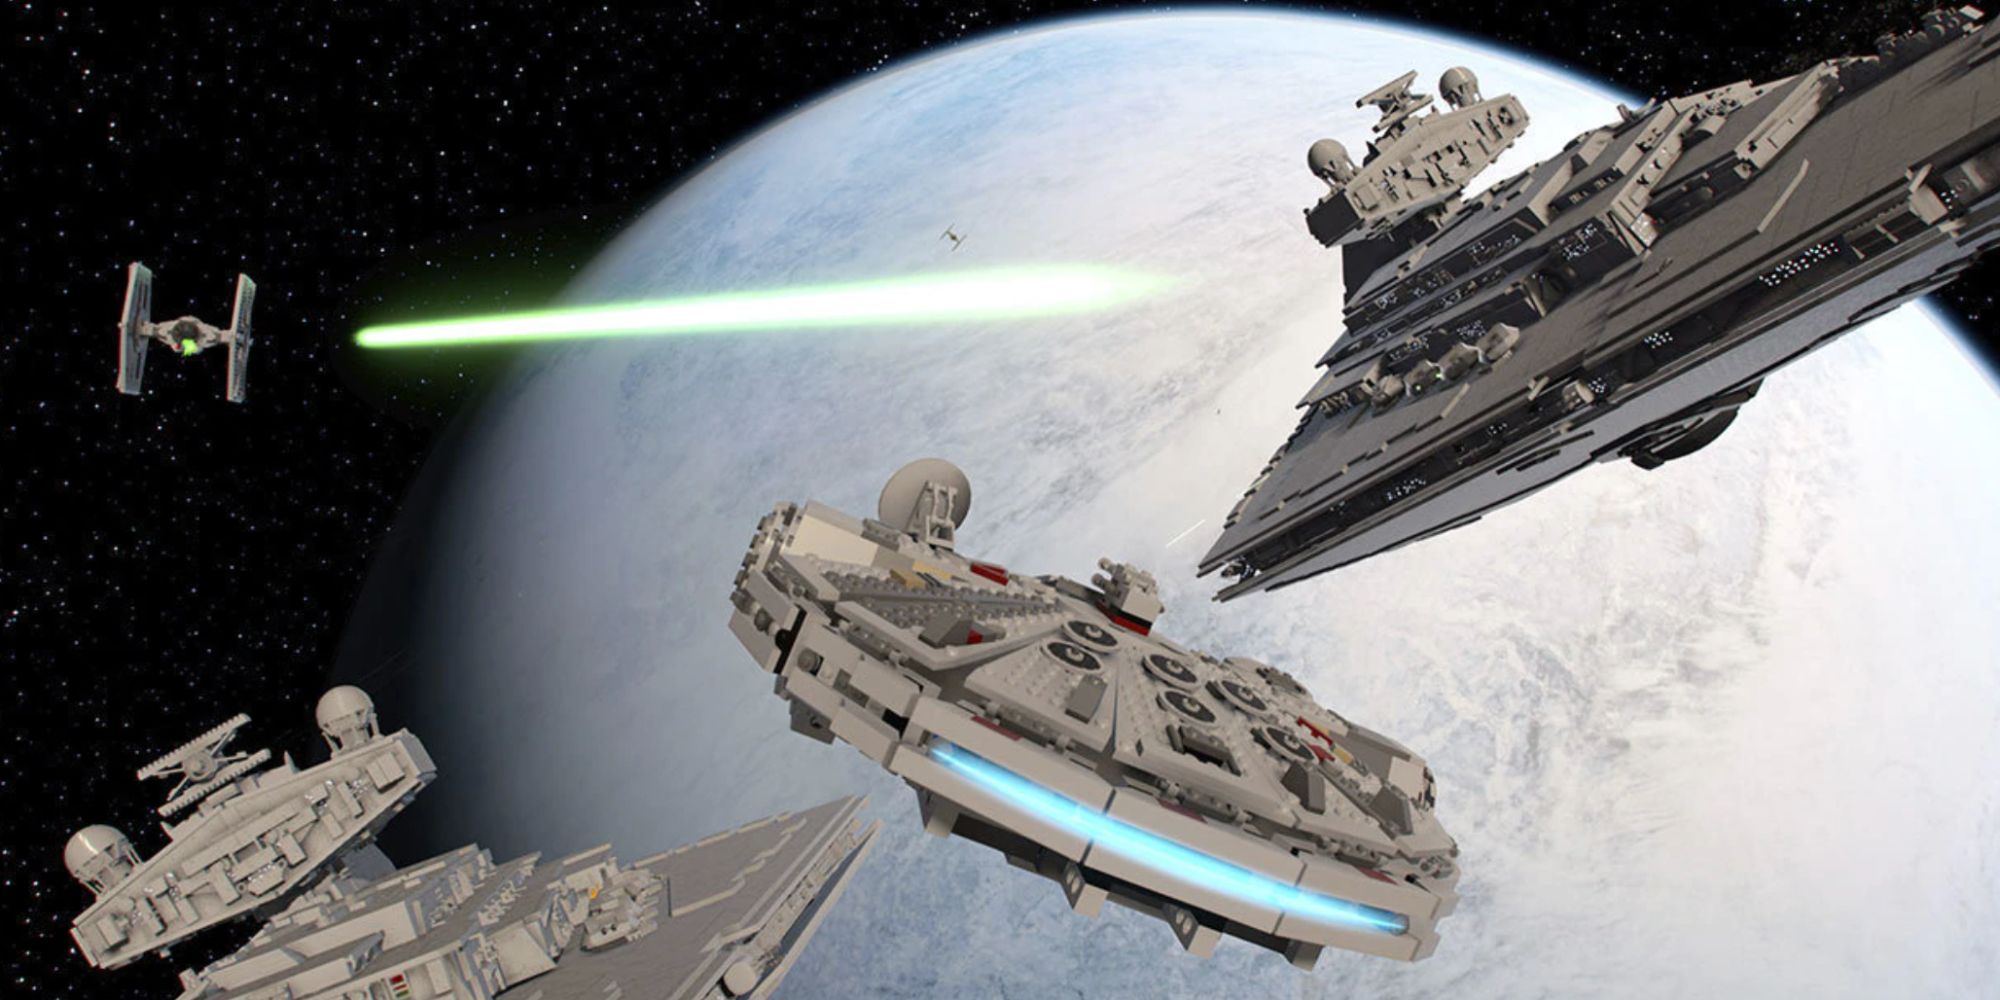 Players will be able to fly the Millennium Falcon and many other ships and speeders in LEGO Star Wars: The Skywalker Saga